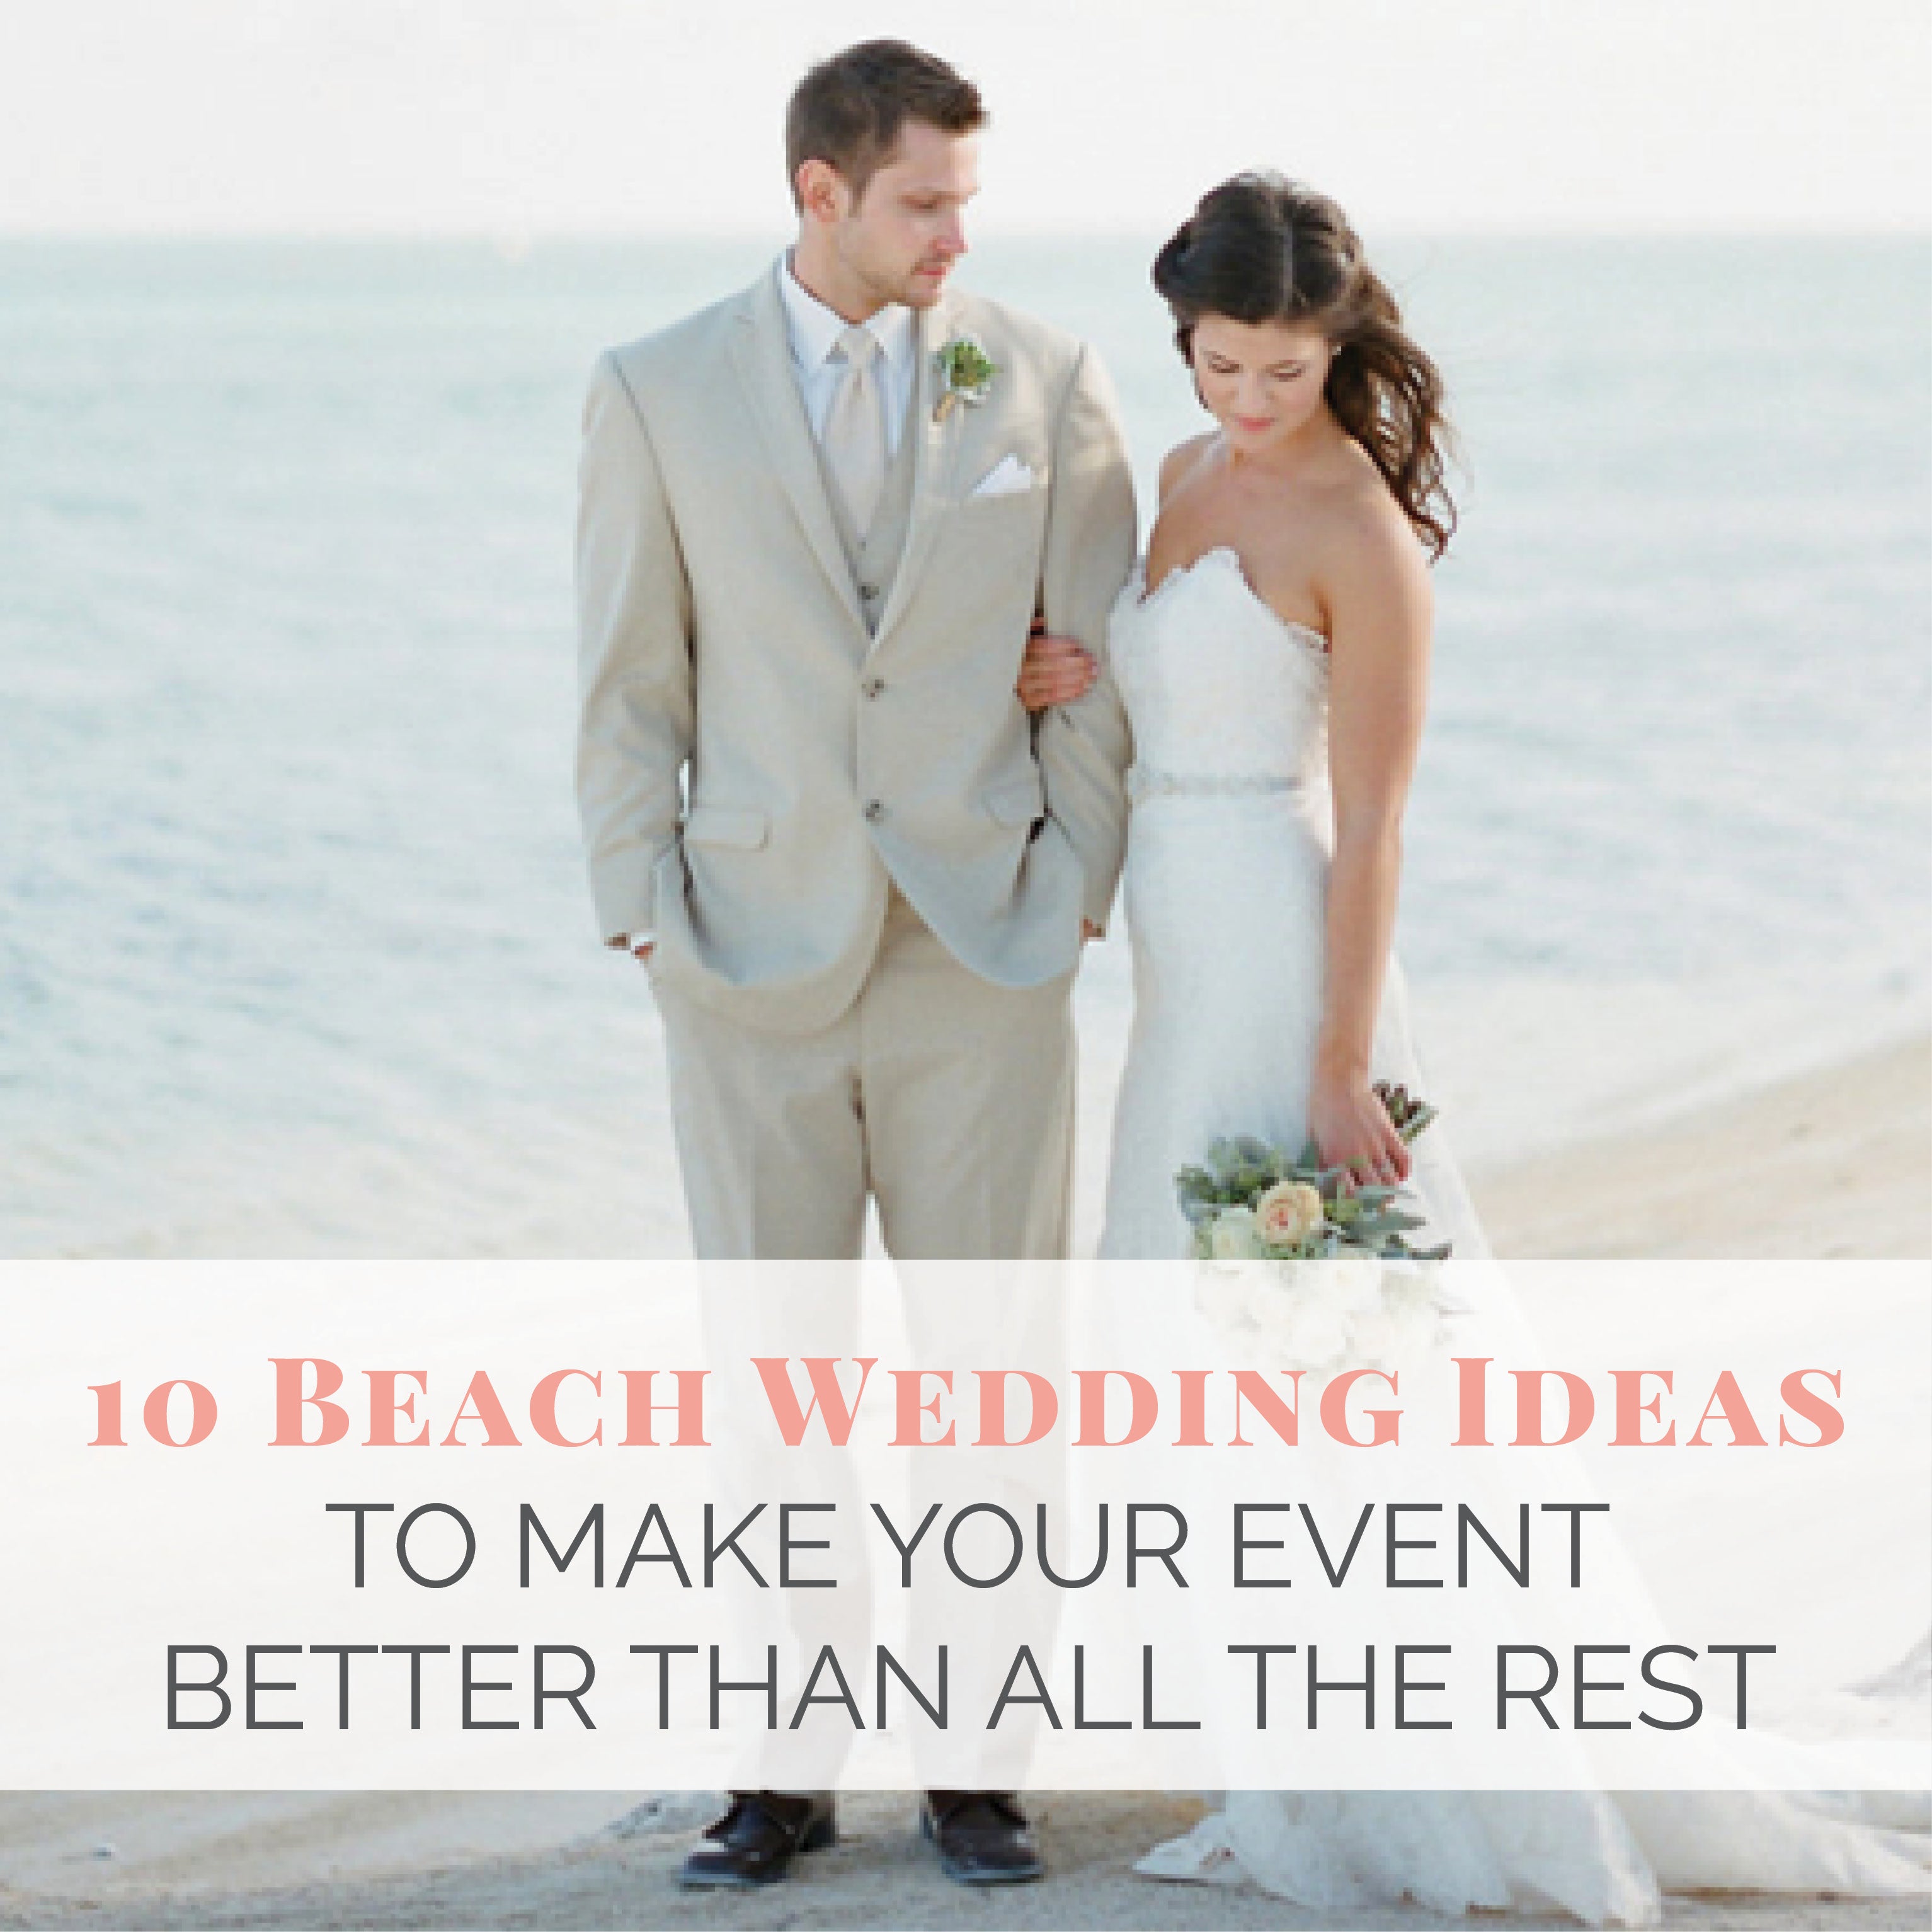 10 Beach Wedding Ideas To Make Your Event Better Than All